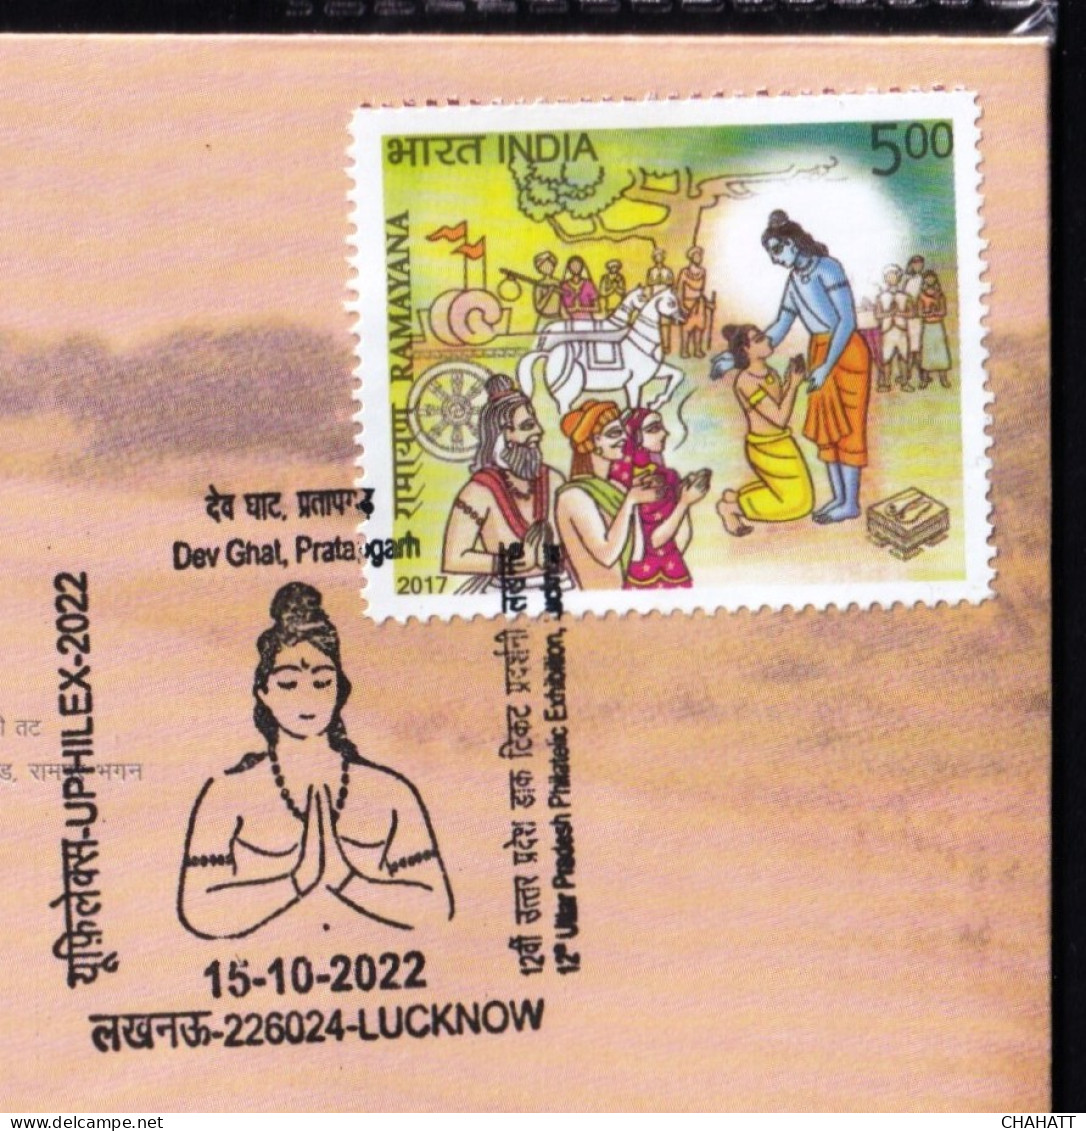 HINDUISM - RAMAYAN-  DEV GHAT, PRATAPGARH - PICTORIAL CANCELLATION - SPECIAL COVER - INDIA -2022- BX4-23 - Induismo